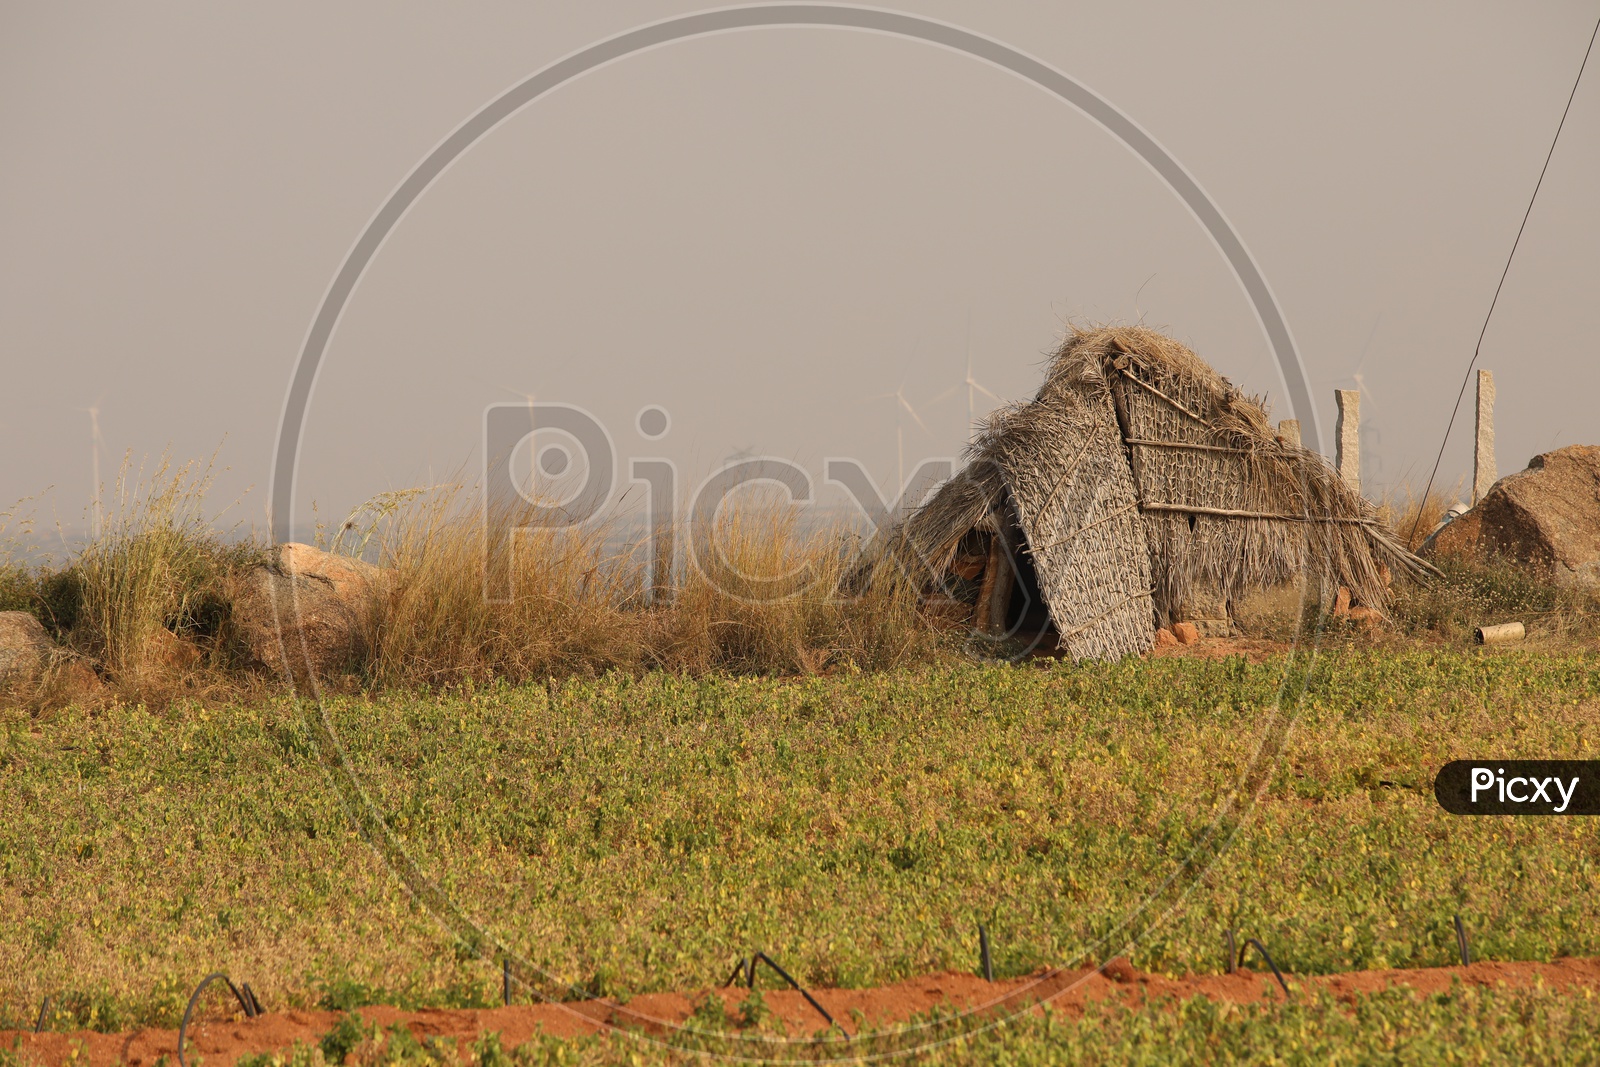 A hut in agriculture field